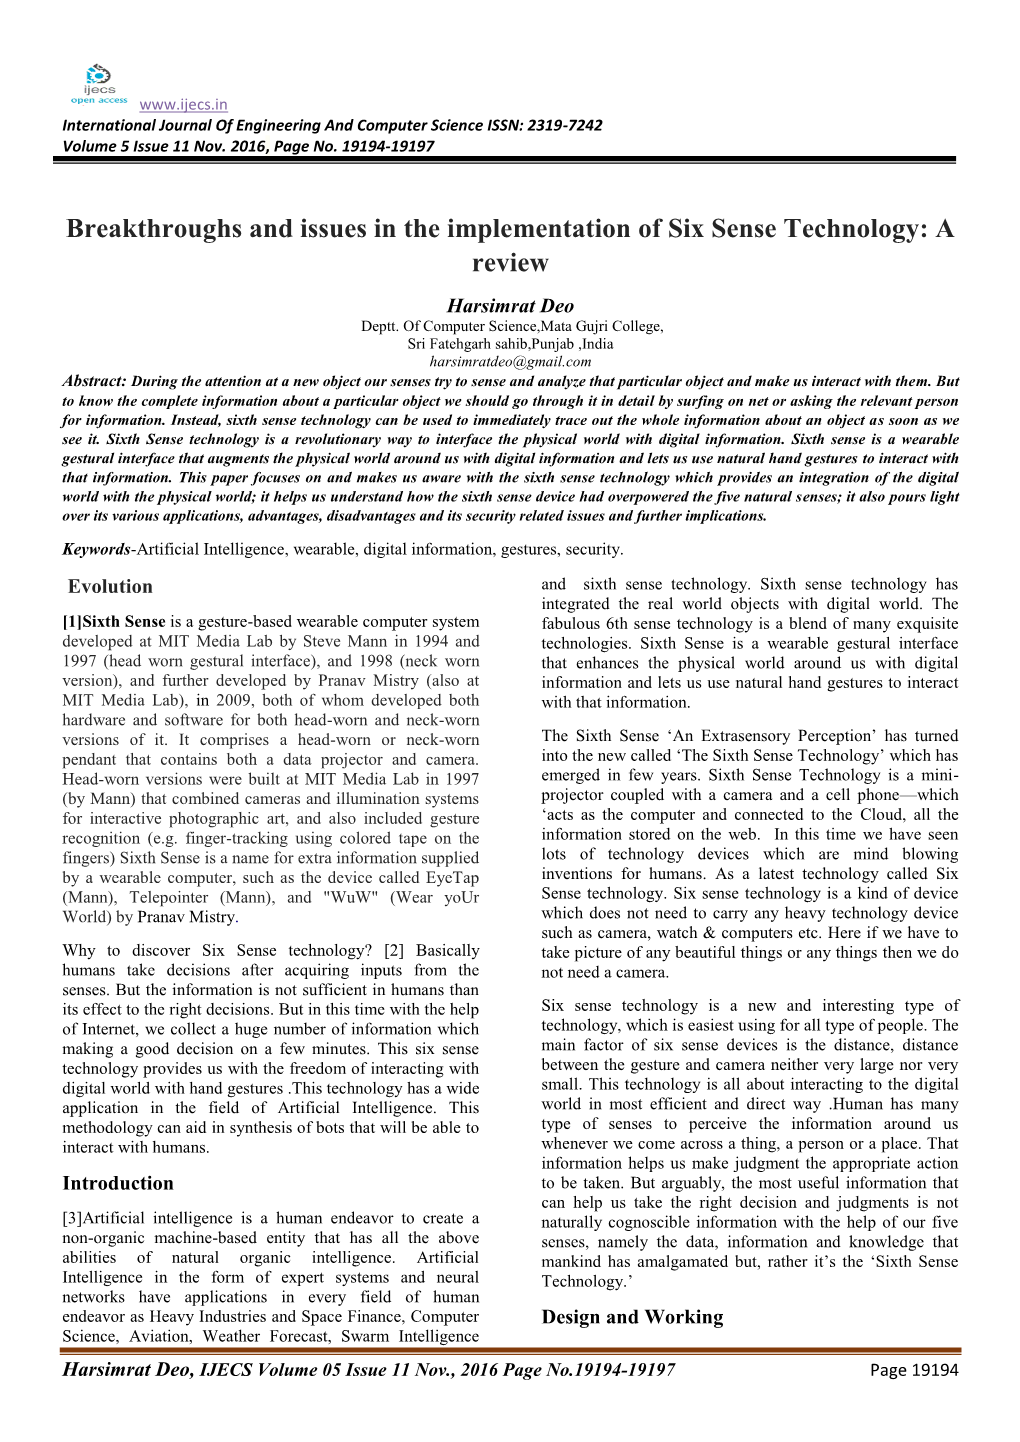 Breakthroughs and Issues in the Implementation of Six Sense Technology: a Review Harsimrat Deo Deptt